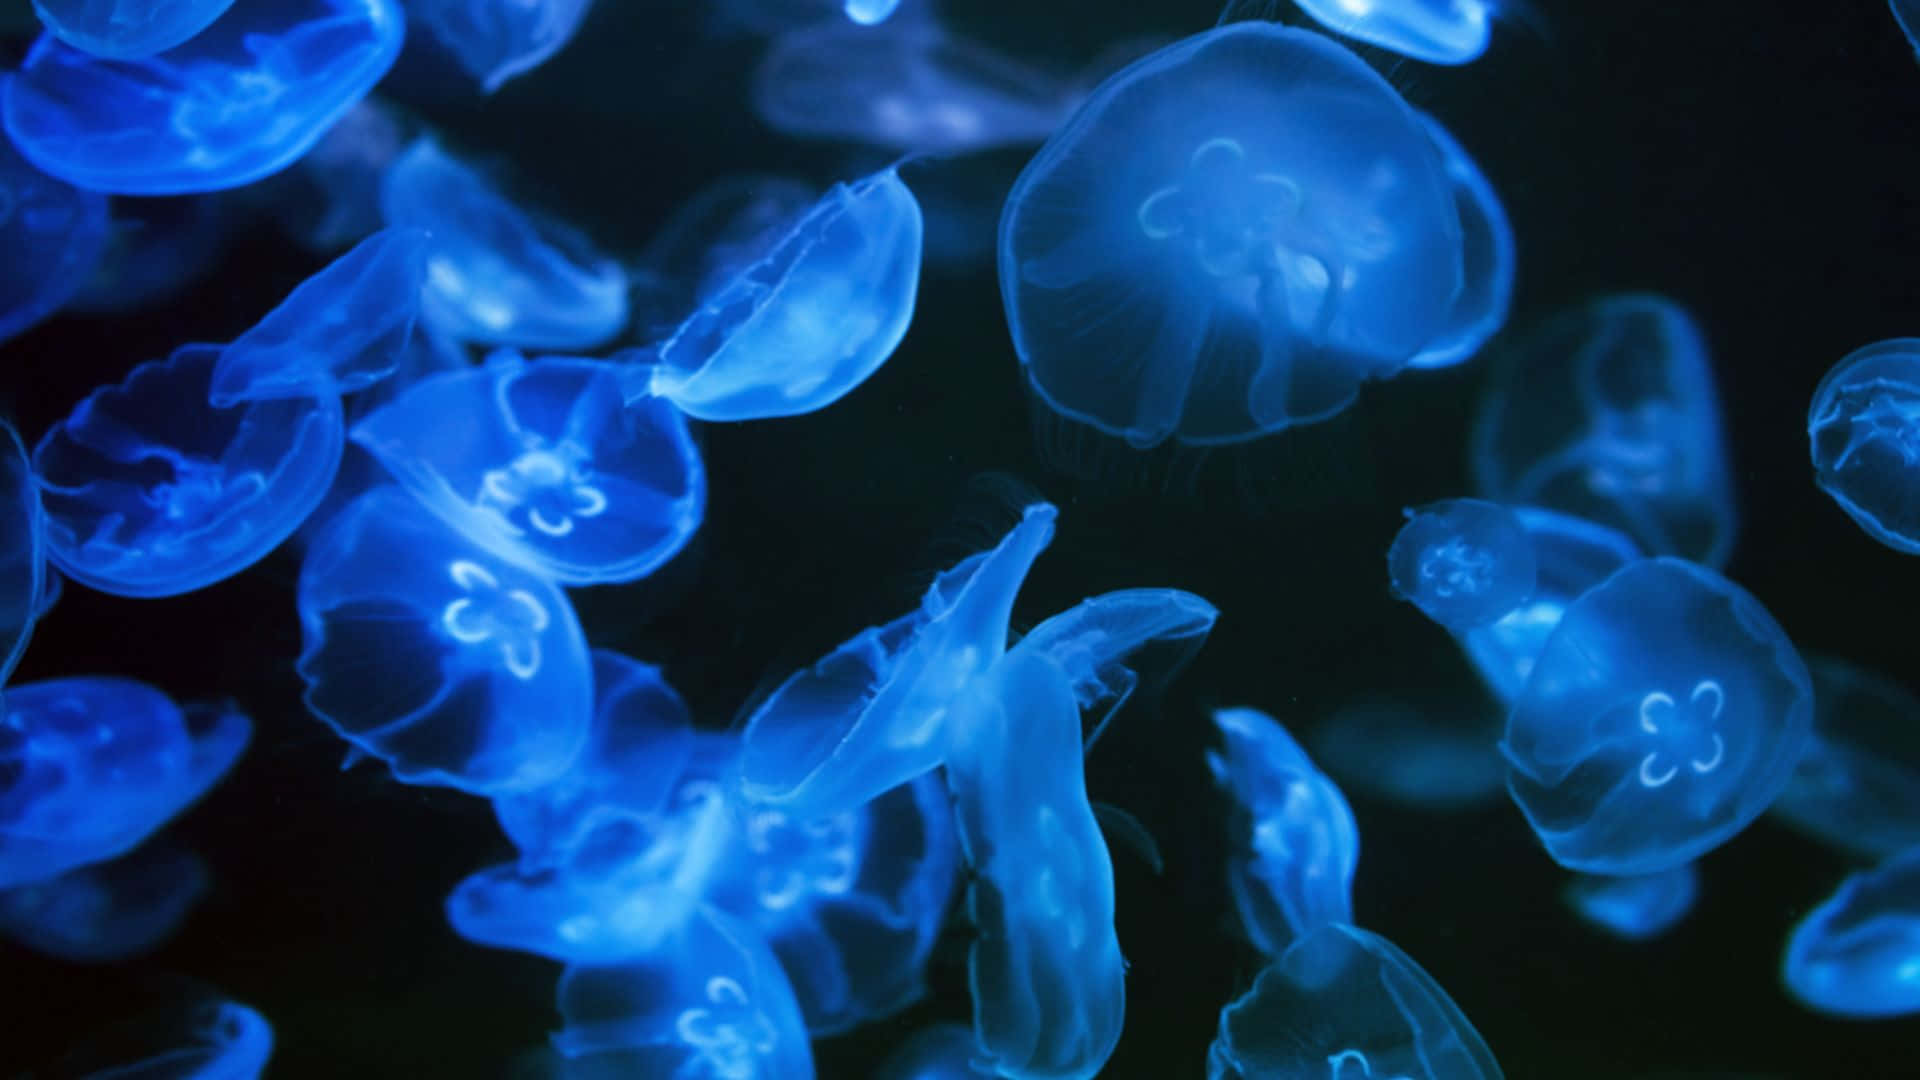 A Mystifying Moon Jelly In The Deep Blue Wallpaper